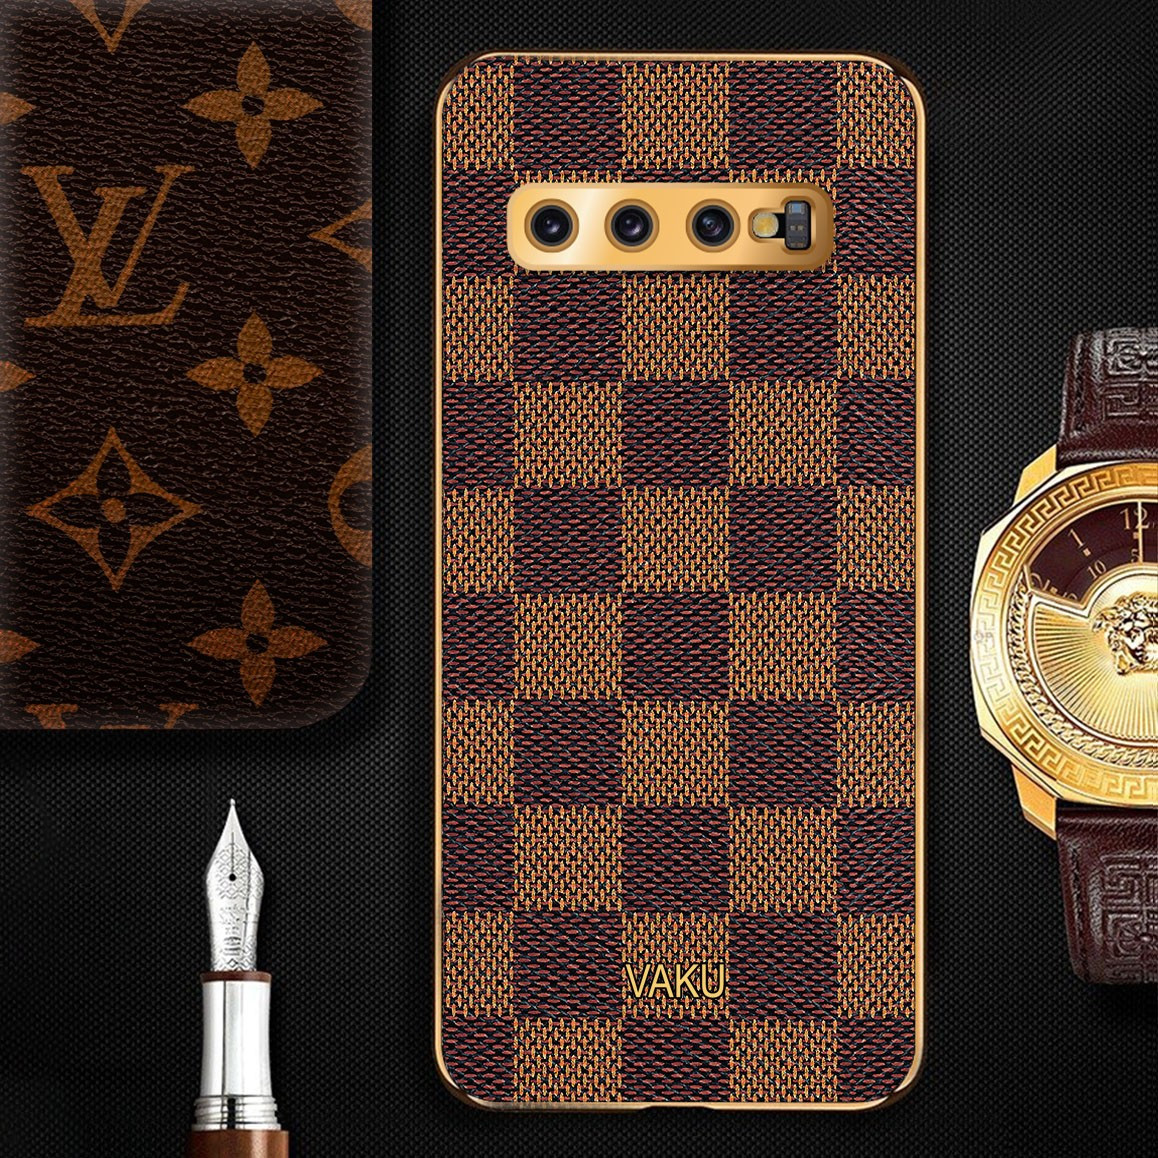 Louis Vuitton Brown Monogram Leather Protective Case for Samsung